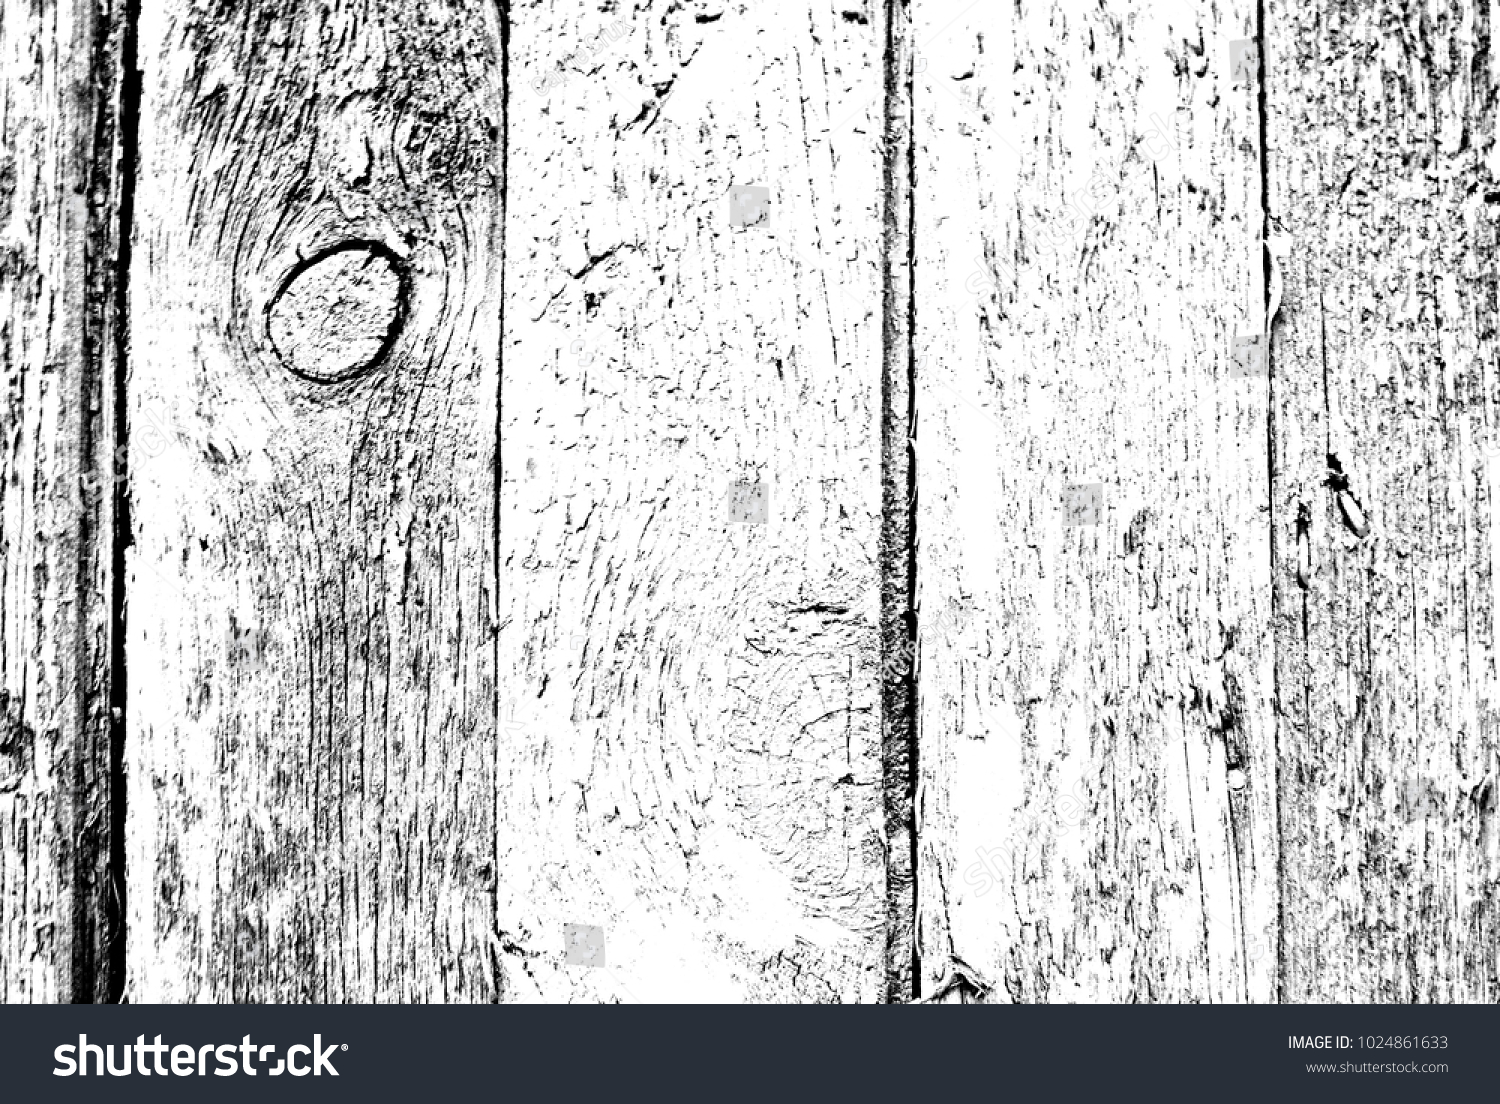 Grunge background with abstract colored texture. Old vintage scratches, stain, paint splats, spots. #1024861633